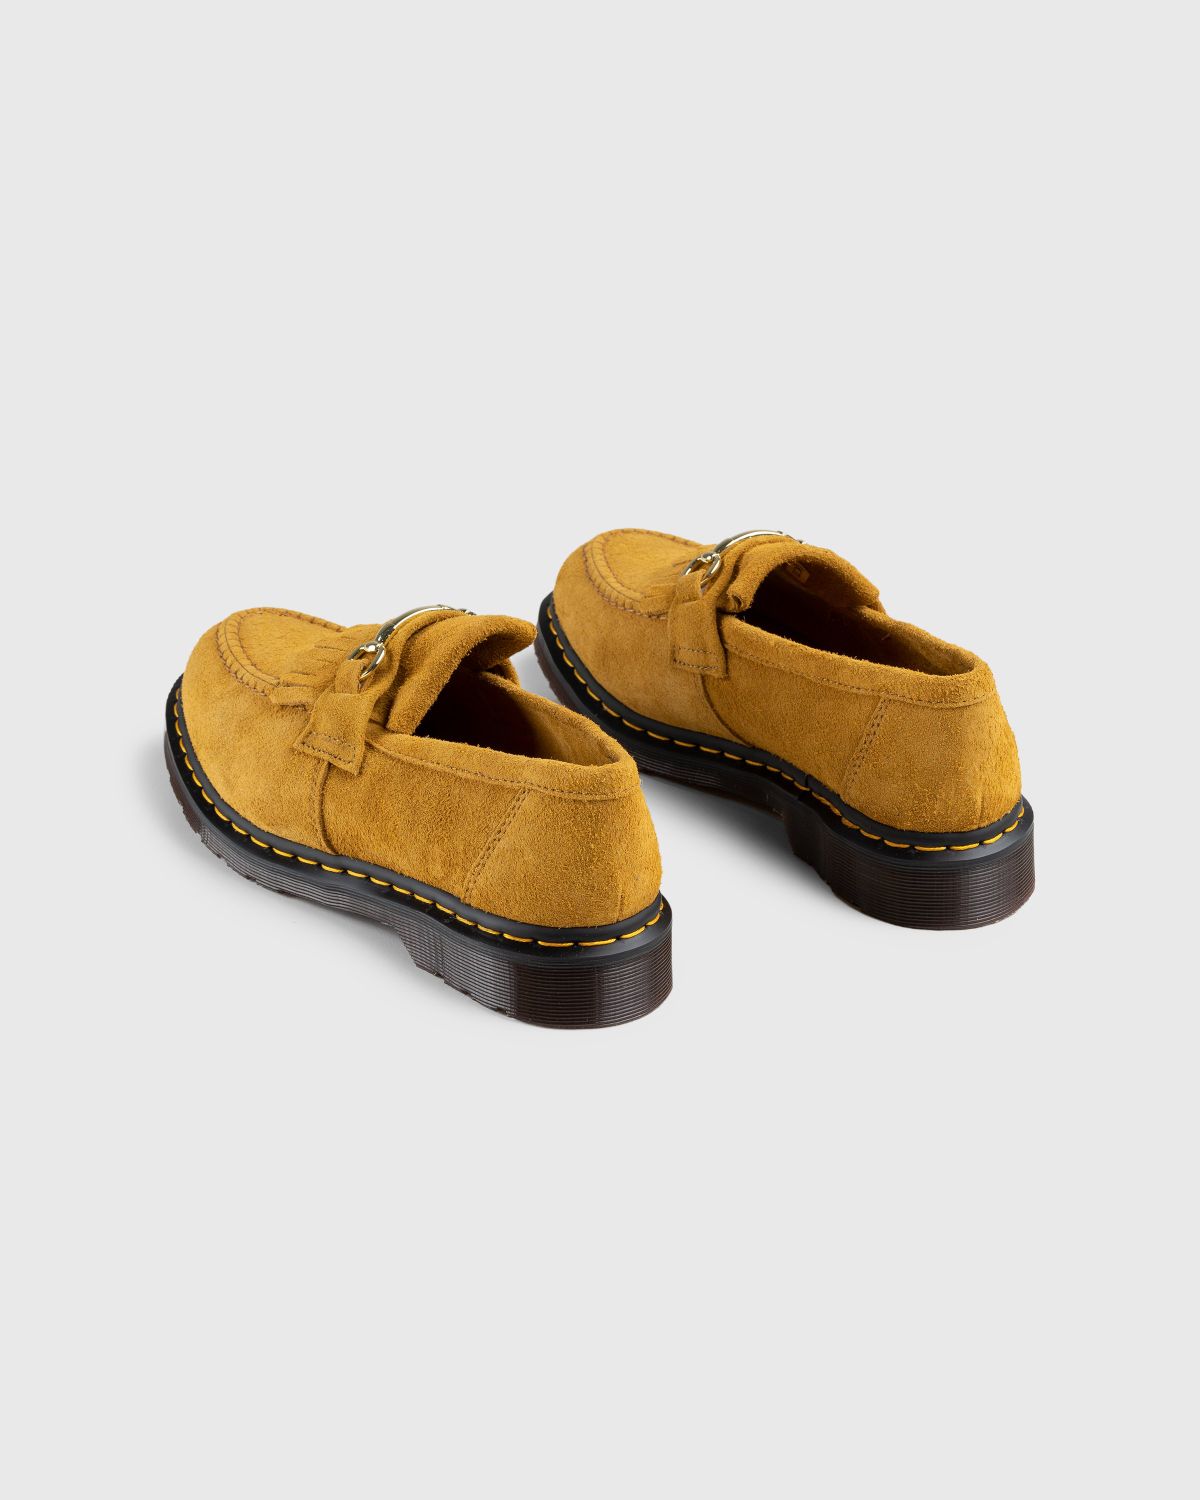 Dr. Martens – Adrian Snaffle Suede Loafers Light Tan Desert Oasis Suede (Gum Oil) - Loafers - Brown - Image 4